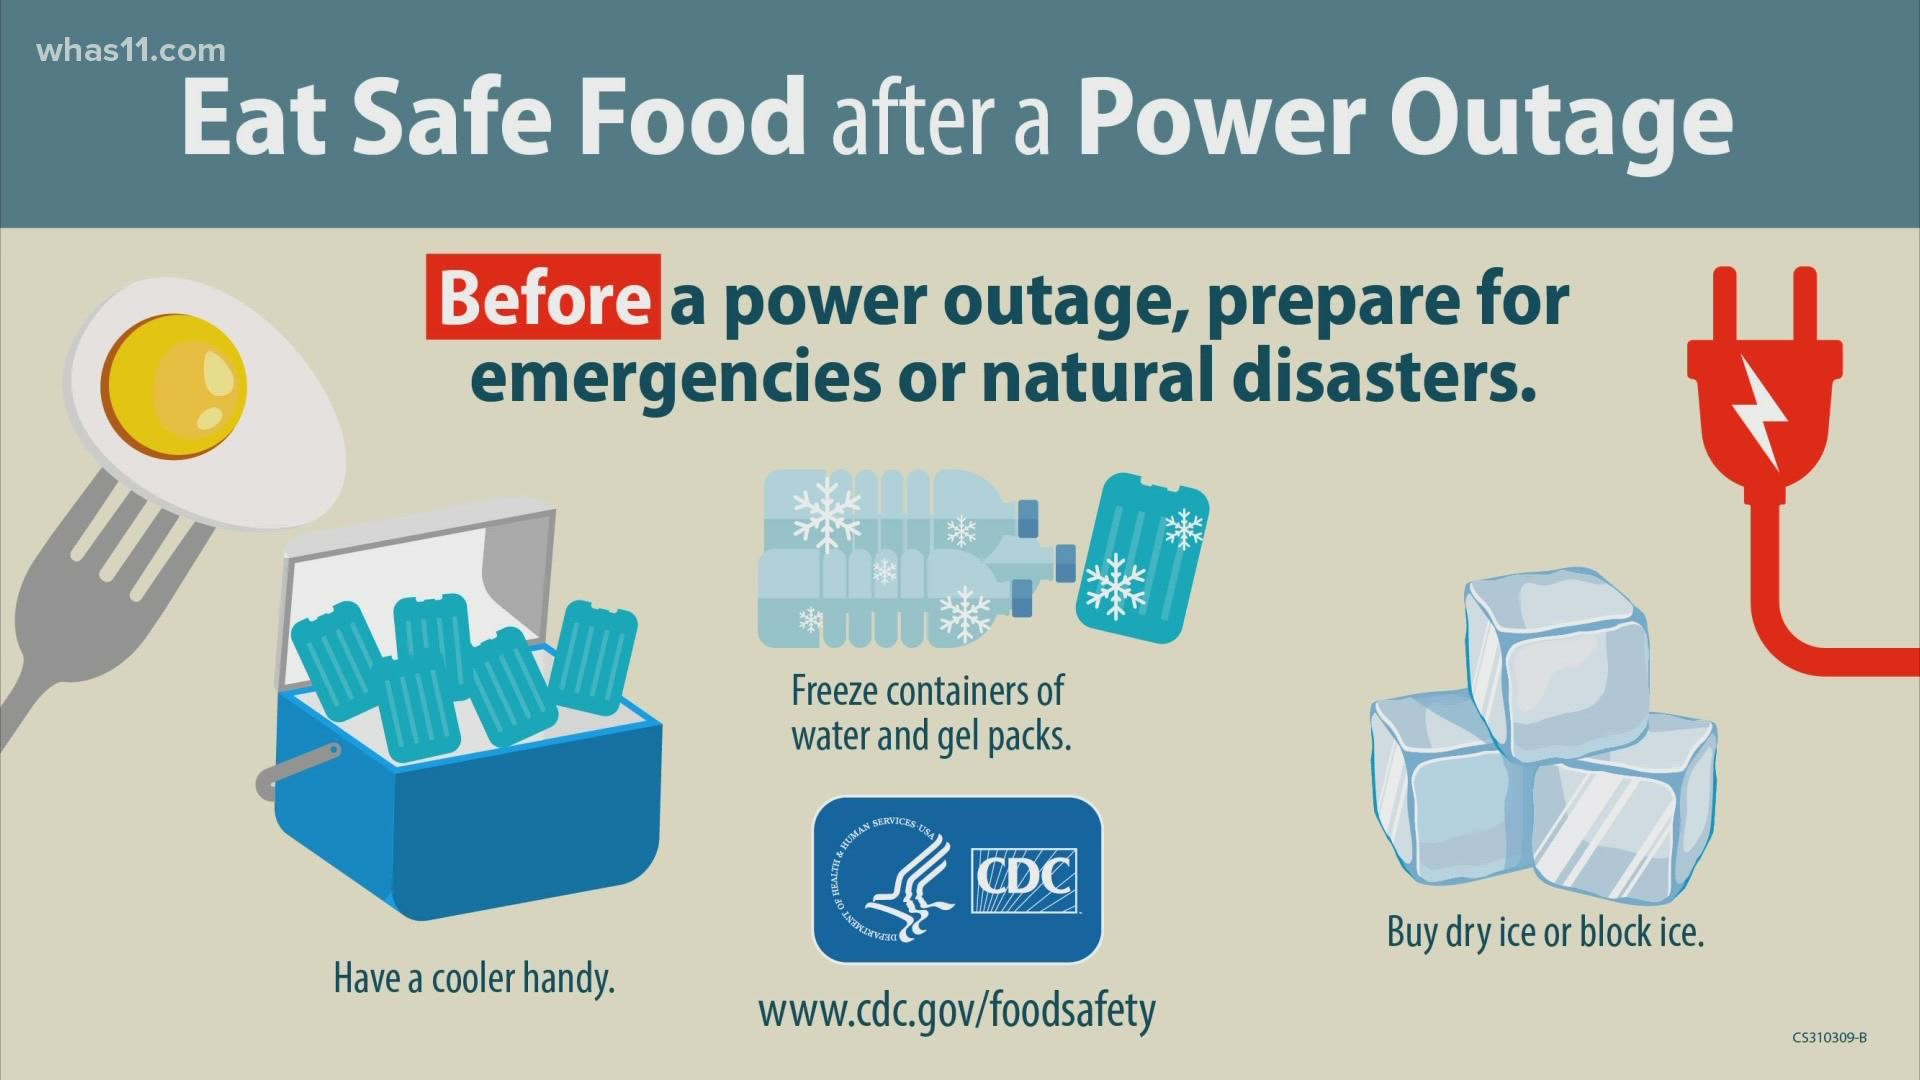 How To Build A Power Outage Kit - Food Storage Moms